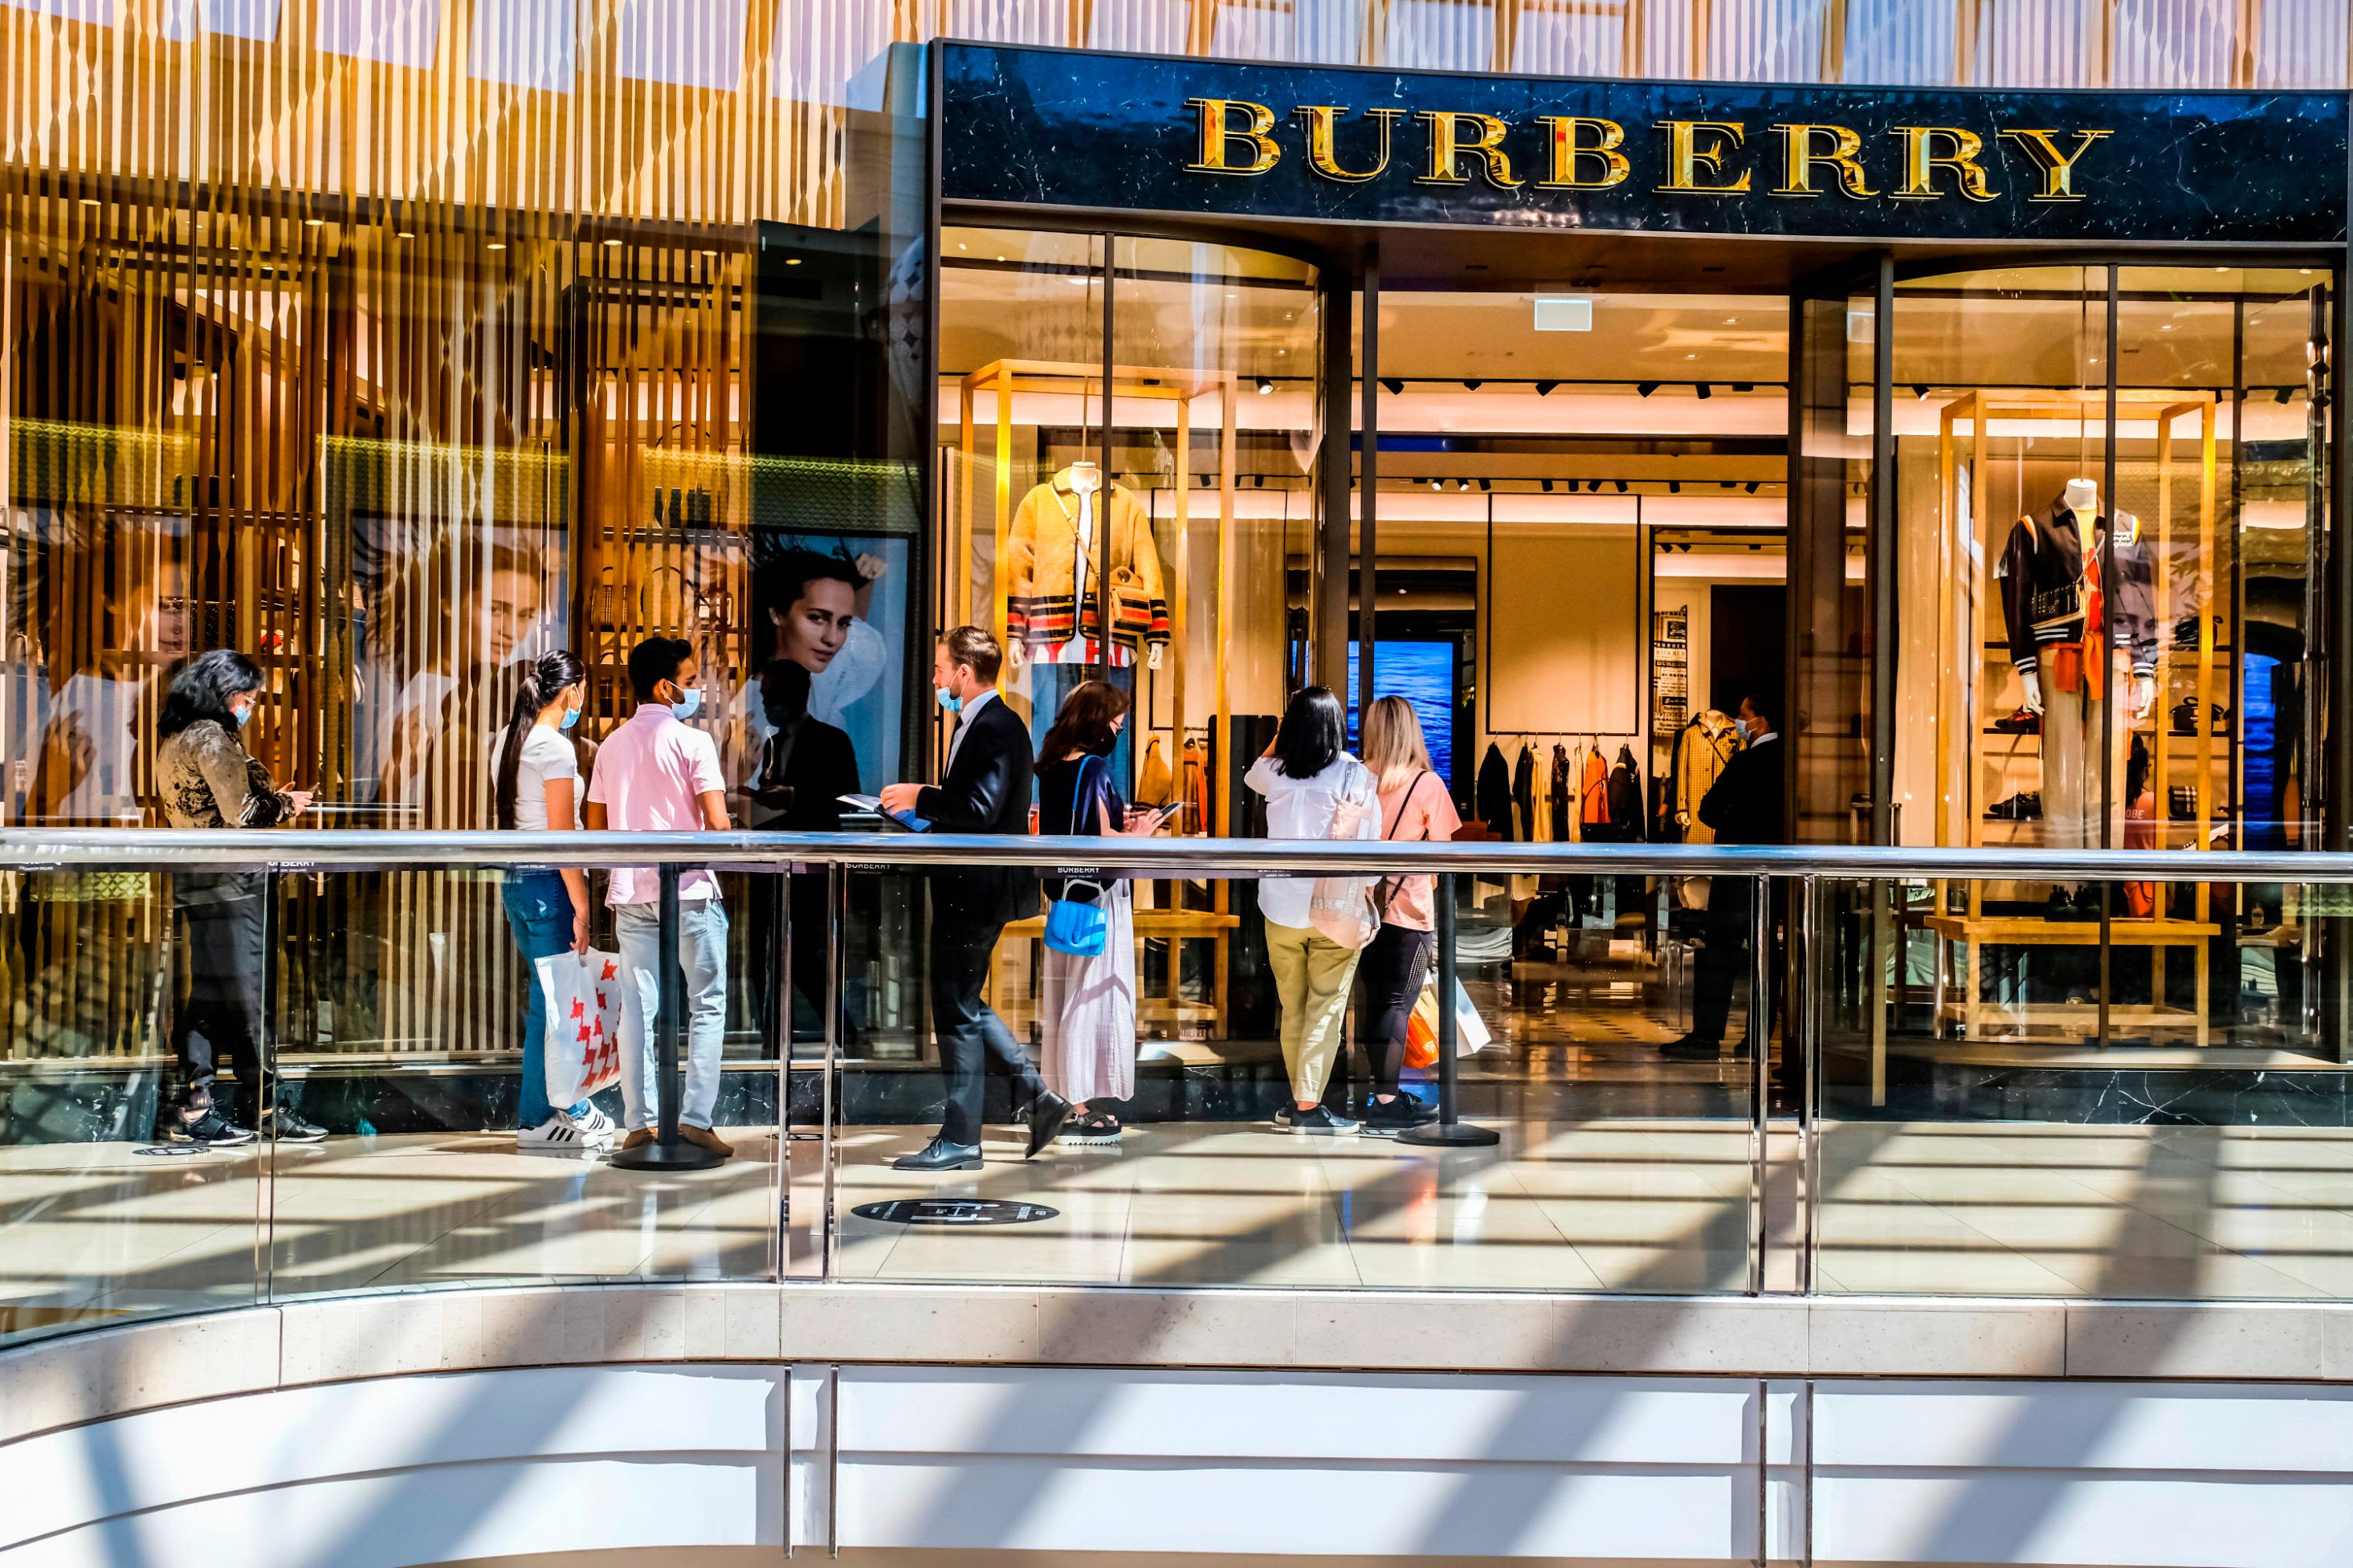 Burberry shares tumble as CEO Marco Gobbetti leaves to join Salvatore  Ferragamo | CNN Business